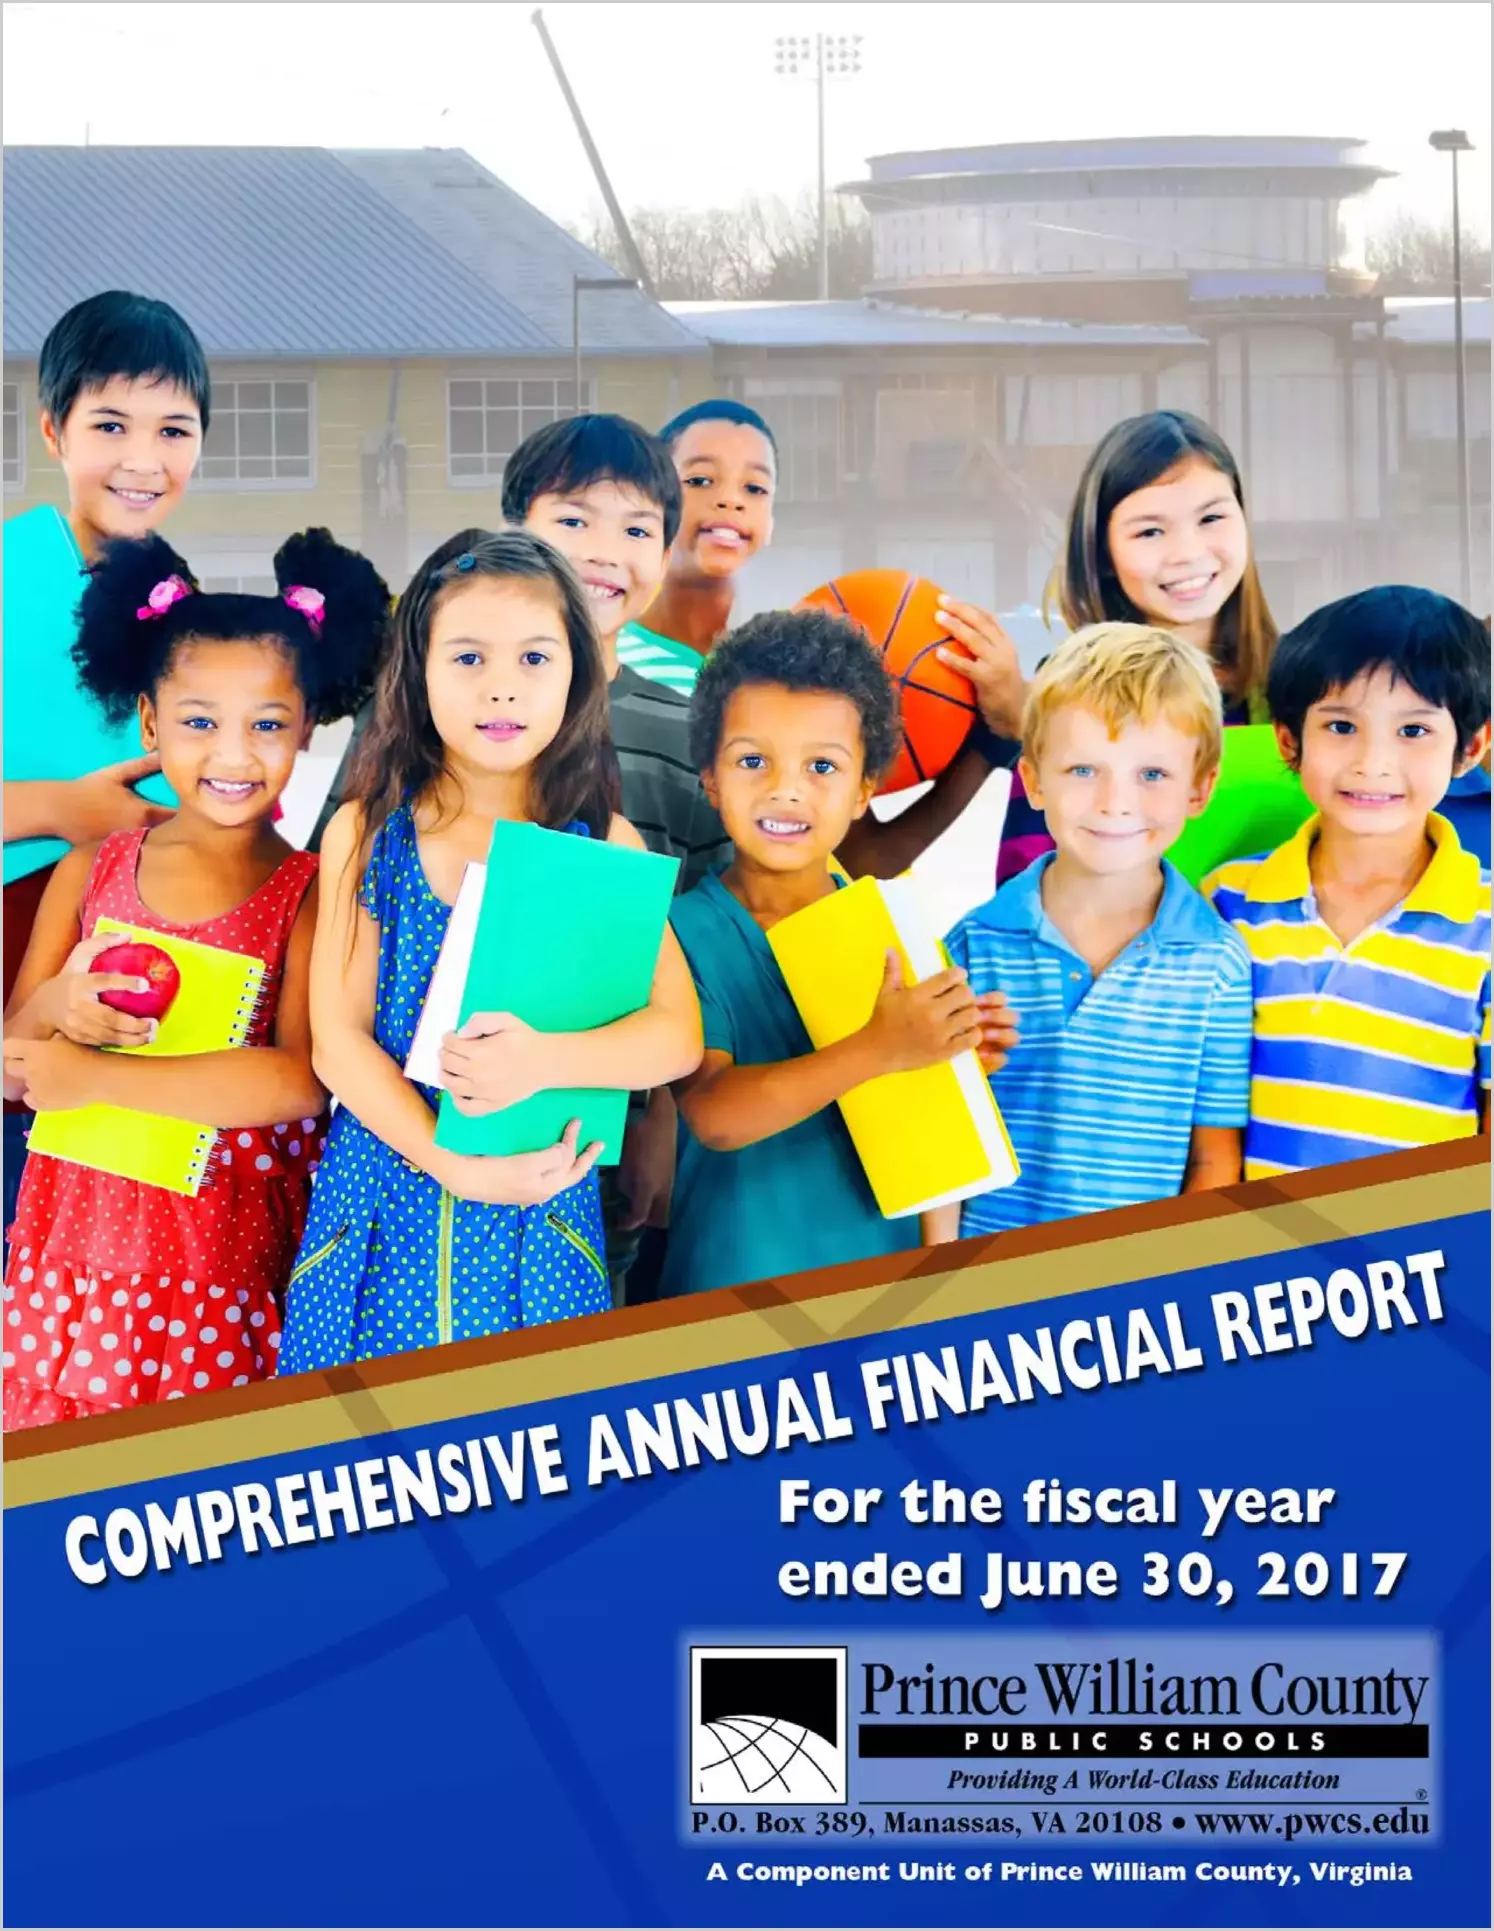 2017 Public Schools Annual Financial Report for County of Prince William